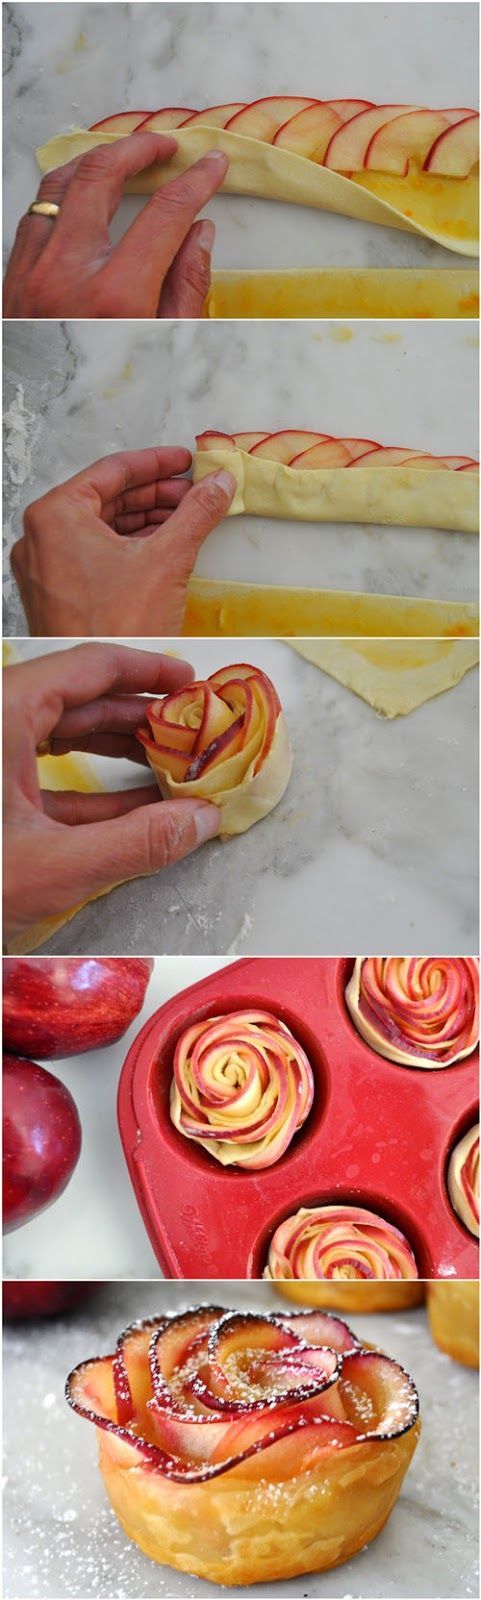 Apple Roses I want to try these with the pears from the pear tree